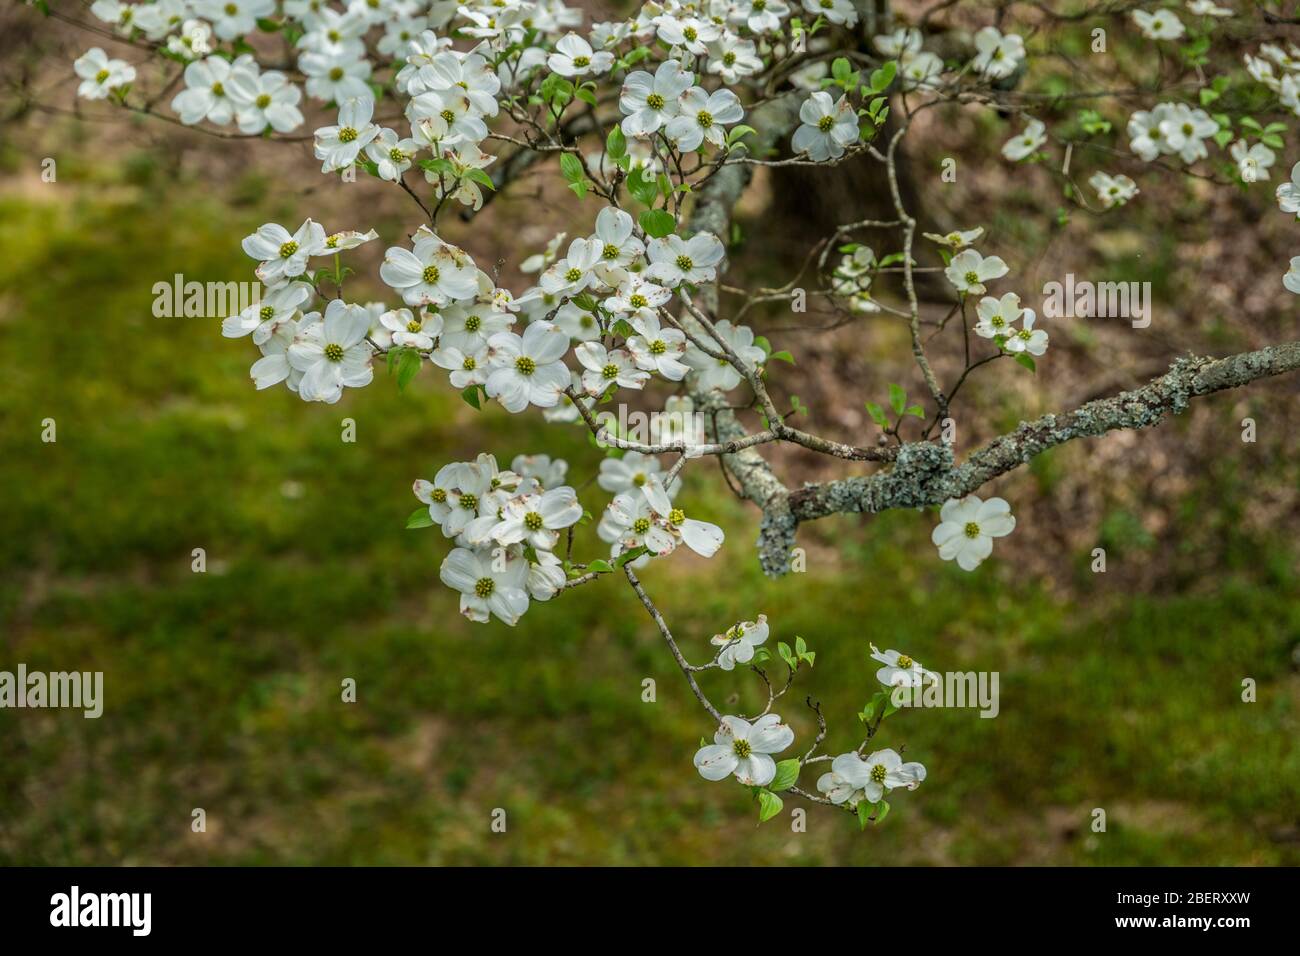 Looking down on a flowering dogwood branch with large white flowers opened up on a sunny day in early springtime Stock Photo